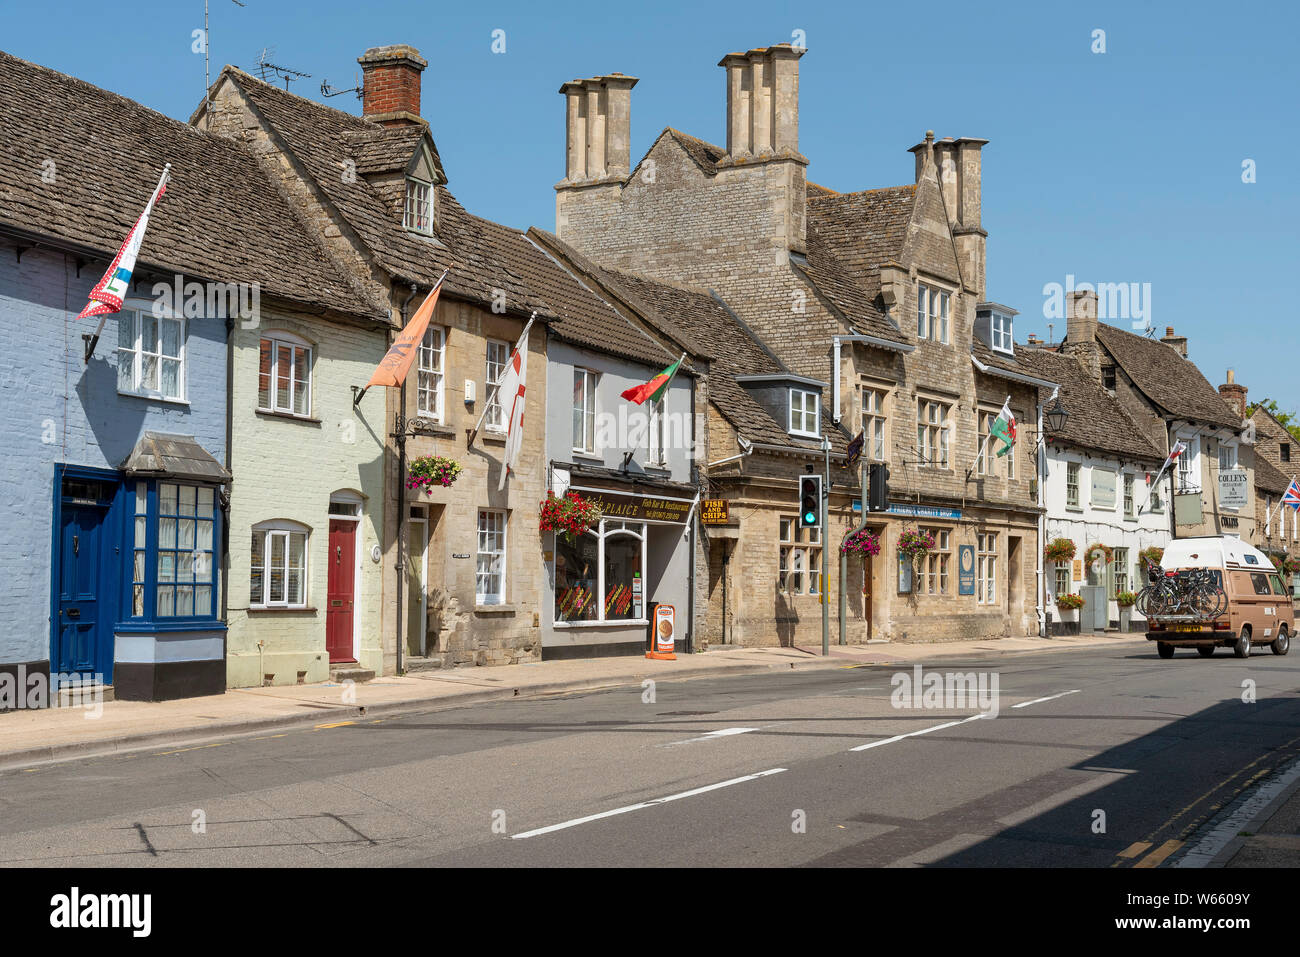 Lechlade, Gloucestershire, England, UK,  The High Street at Lechlade on Thames a small market town on the edge of the Cotswolds. Stock Photo